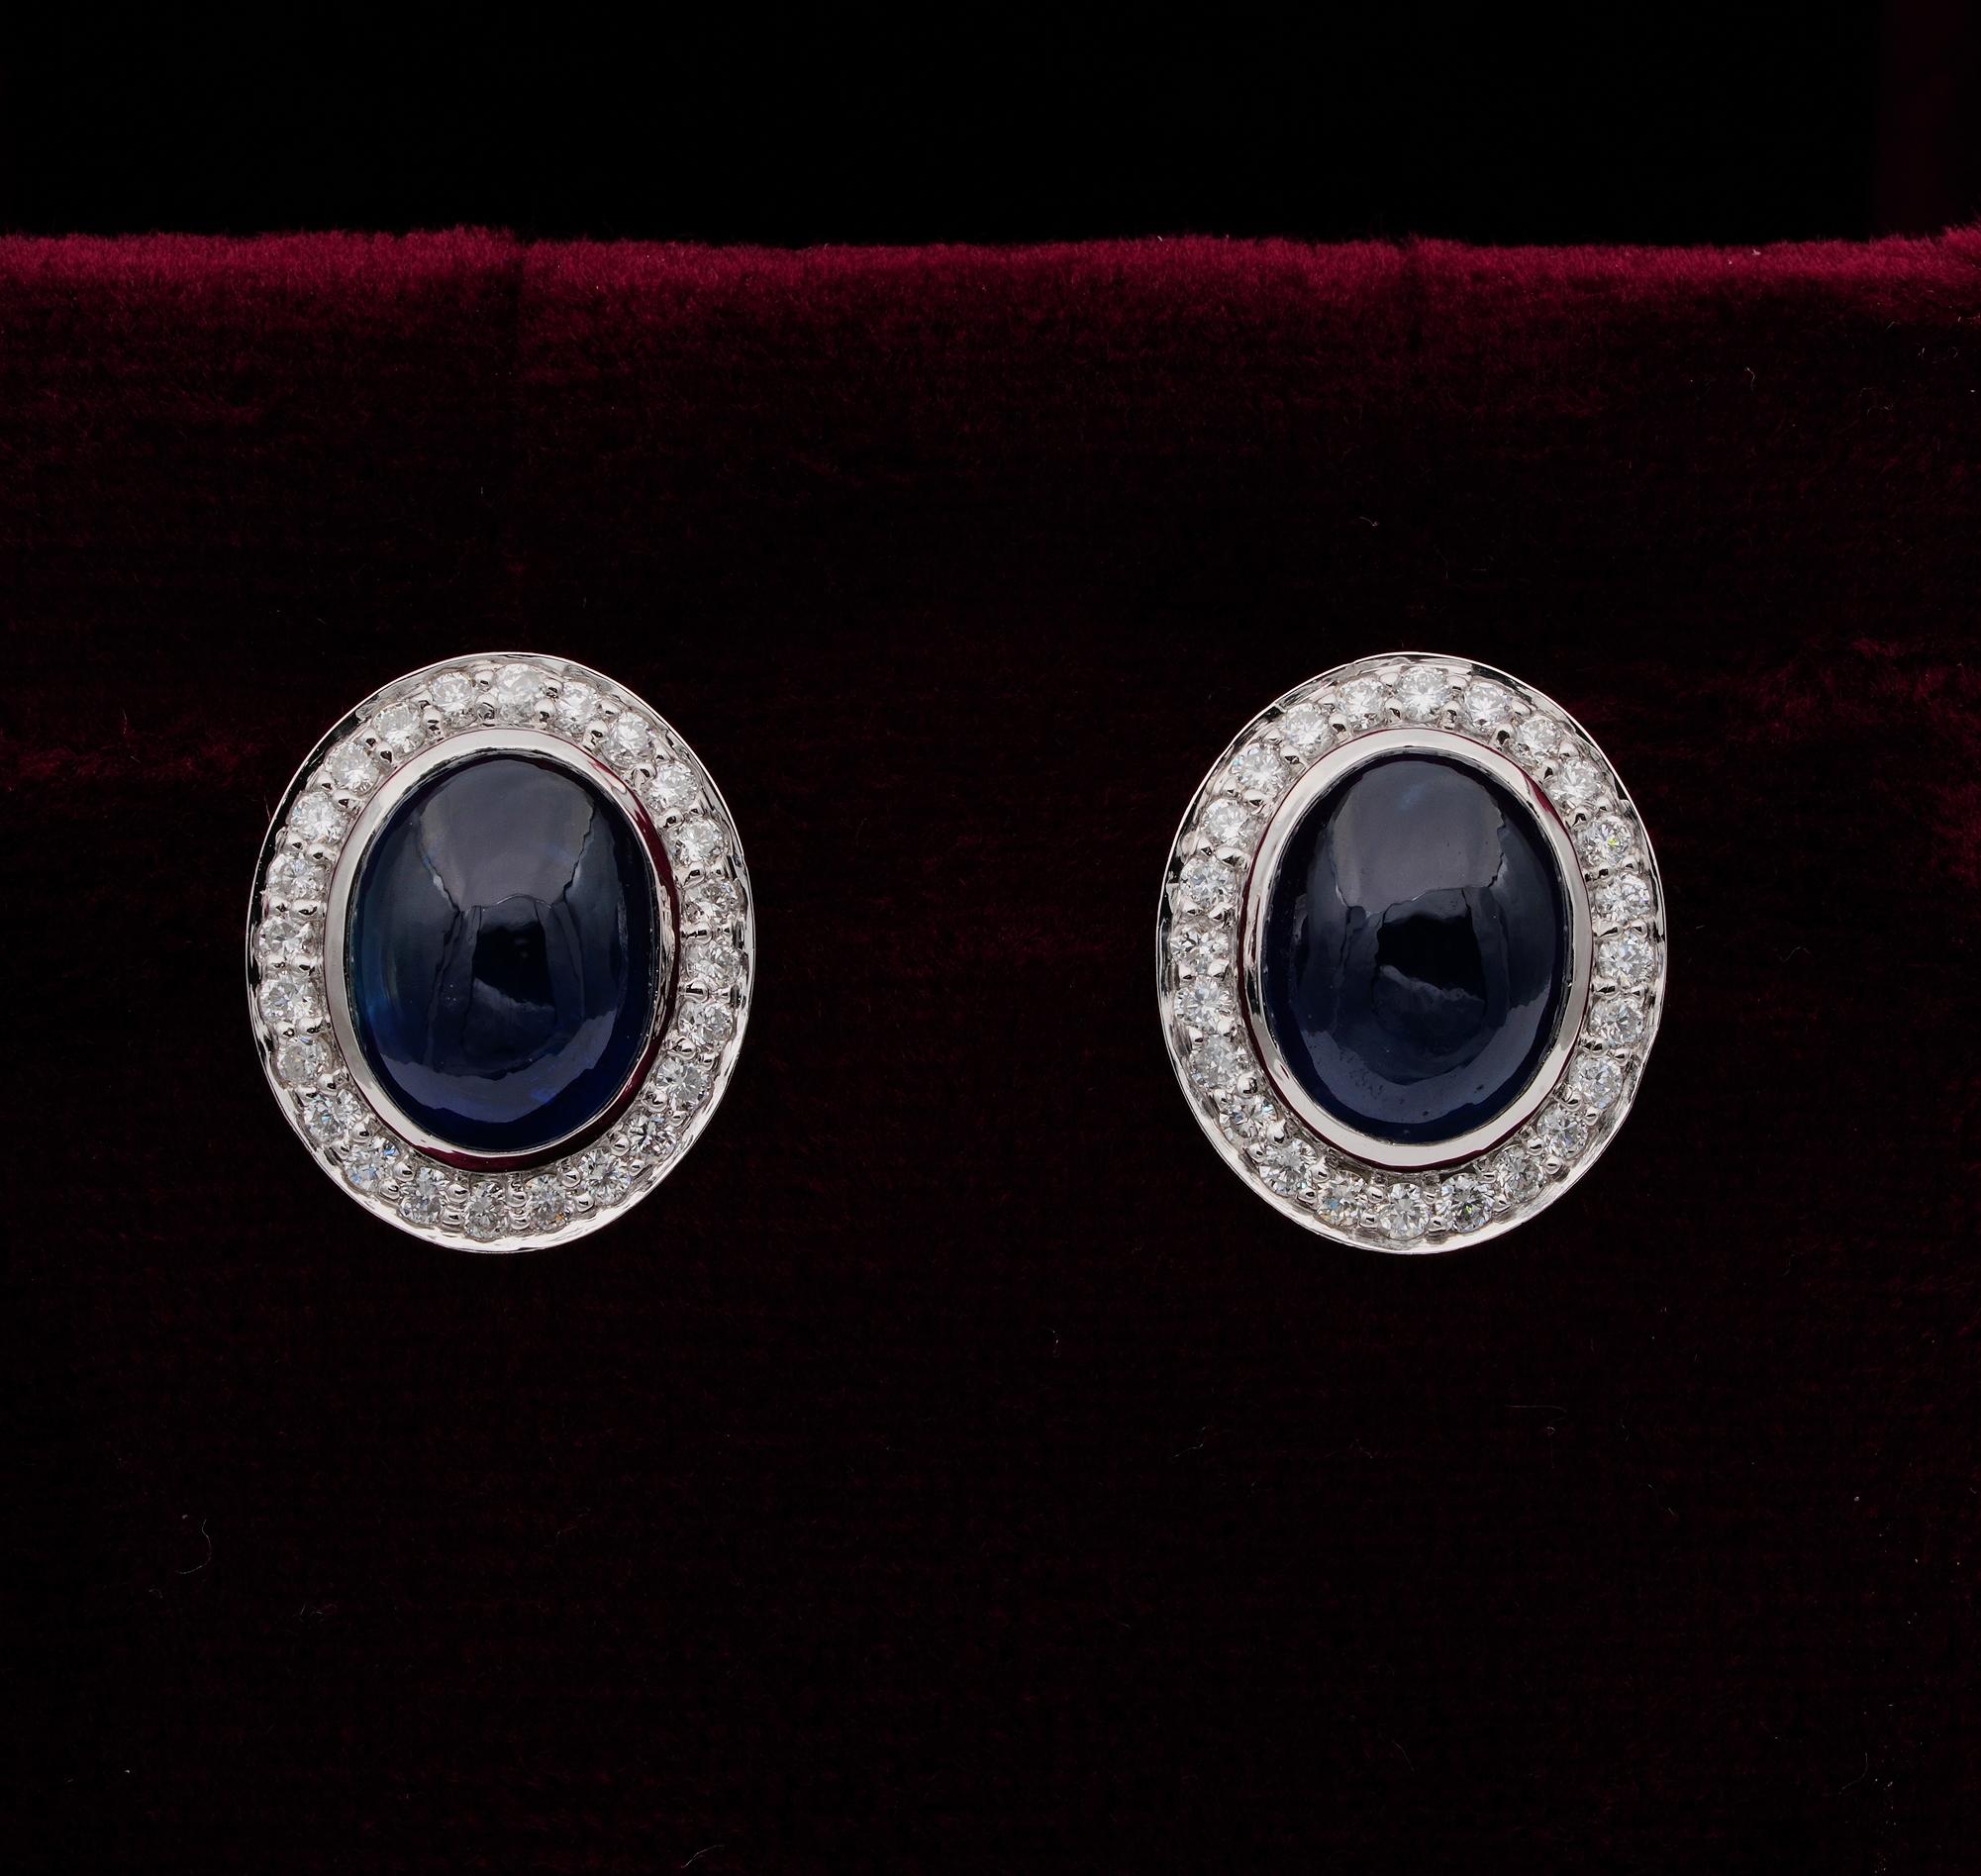 The Classy Must

Perfect always on beautiful contemporary stud earrings set with Natural Untreated Sapphires and glistening Diamonds in a timeless style suitable at any time

Fine sheer quality, hand crafted as unique of solid Platinum – bearing